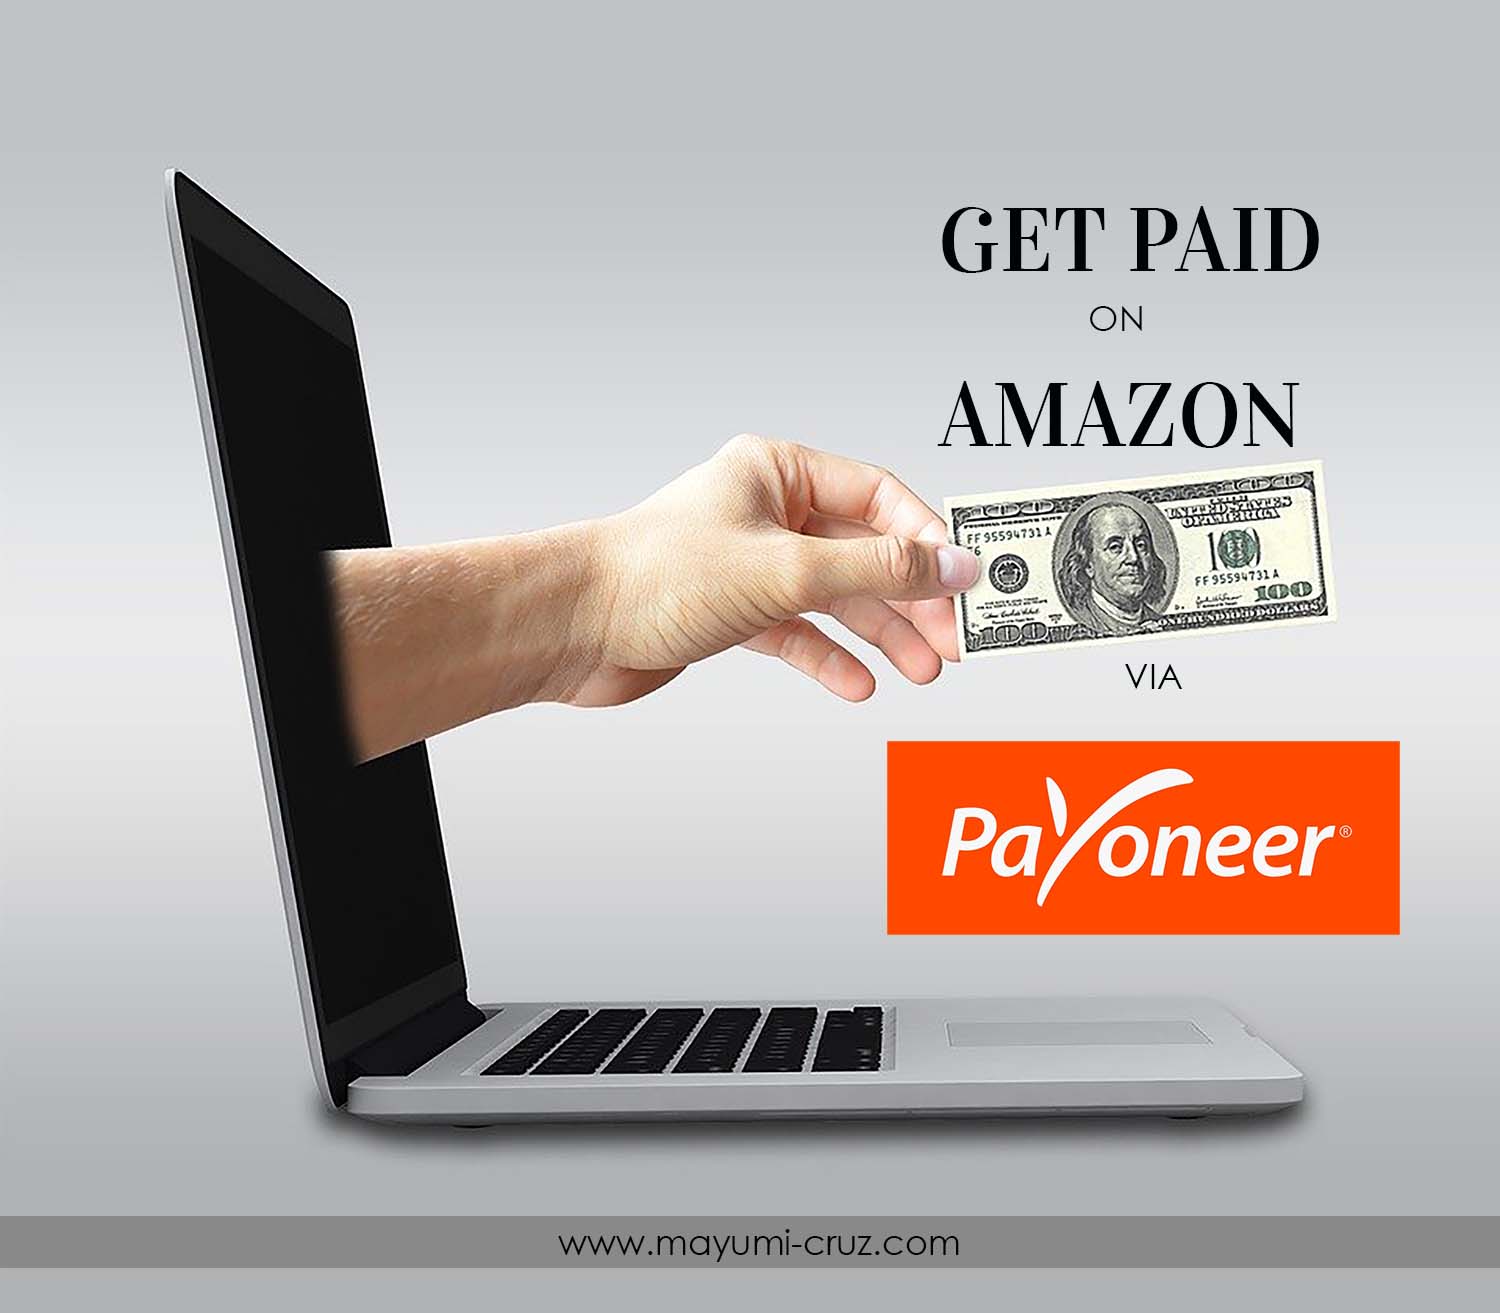 Amazon Pay vs Payoneer | What are the differences?